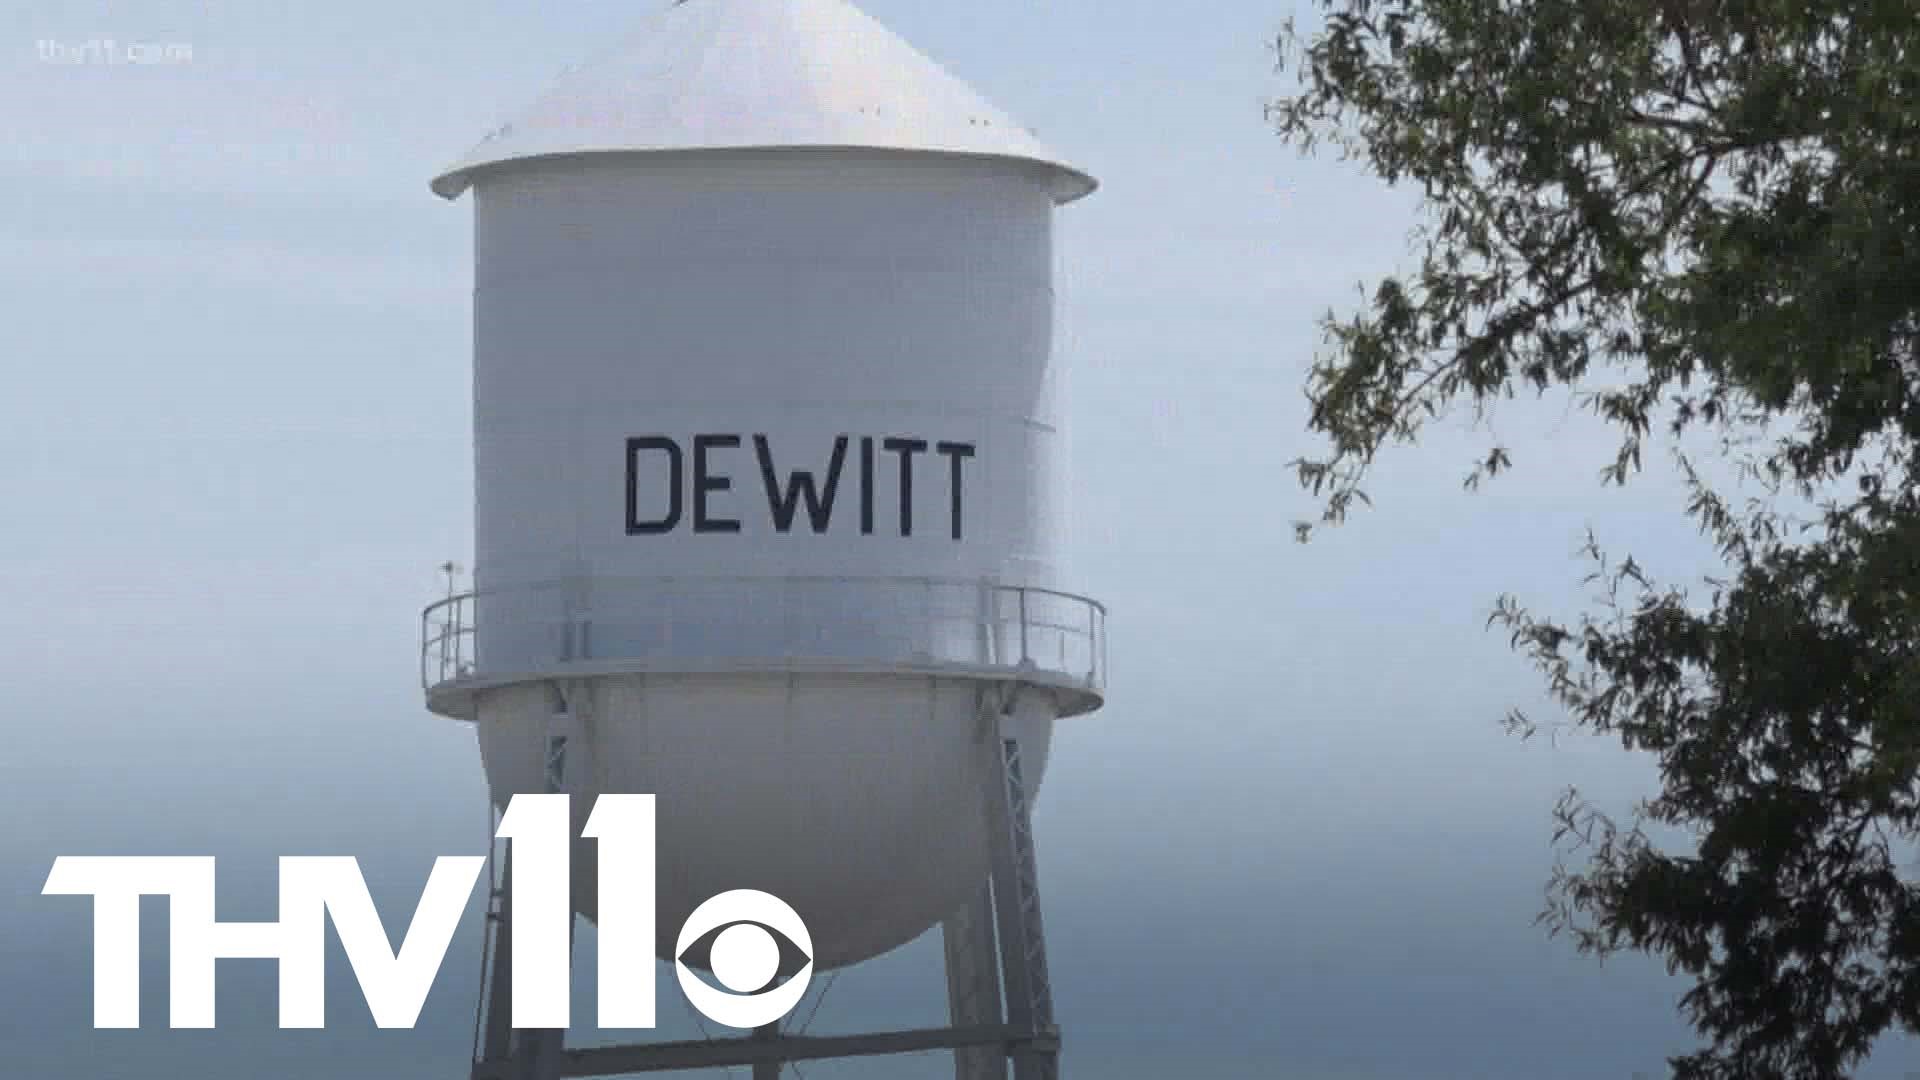 It's an age old question from those at each corner of the Natural State-- how exactly do you pronounce the name "Dewitt?"